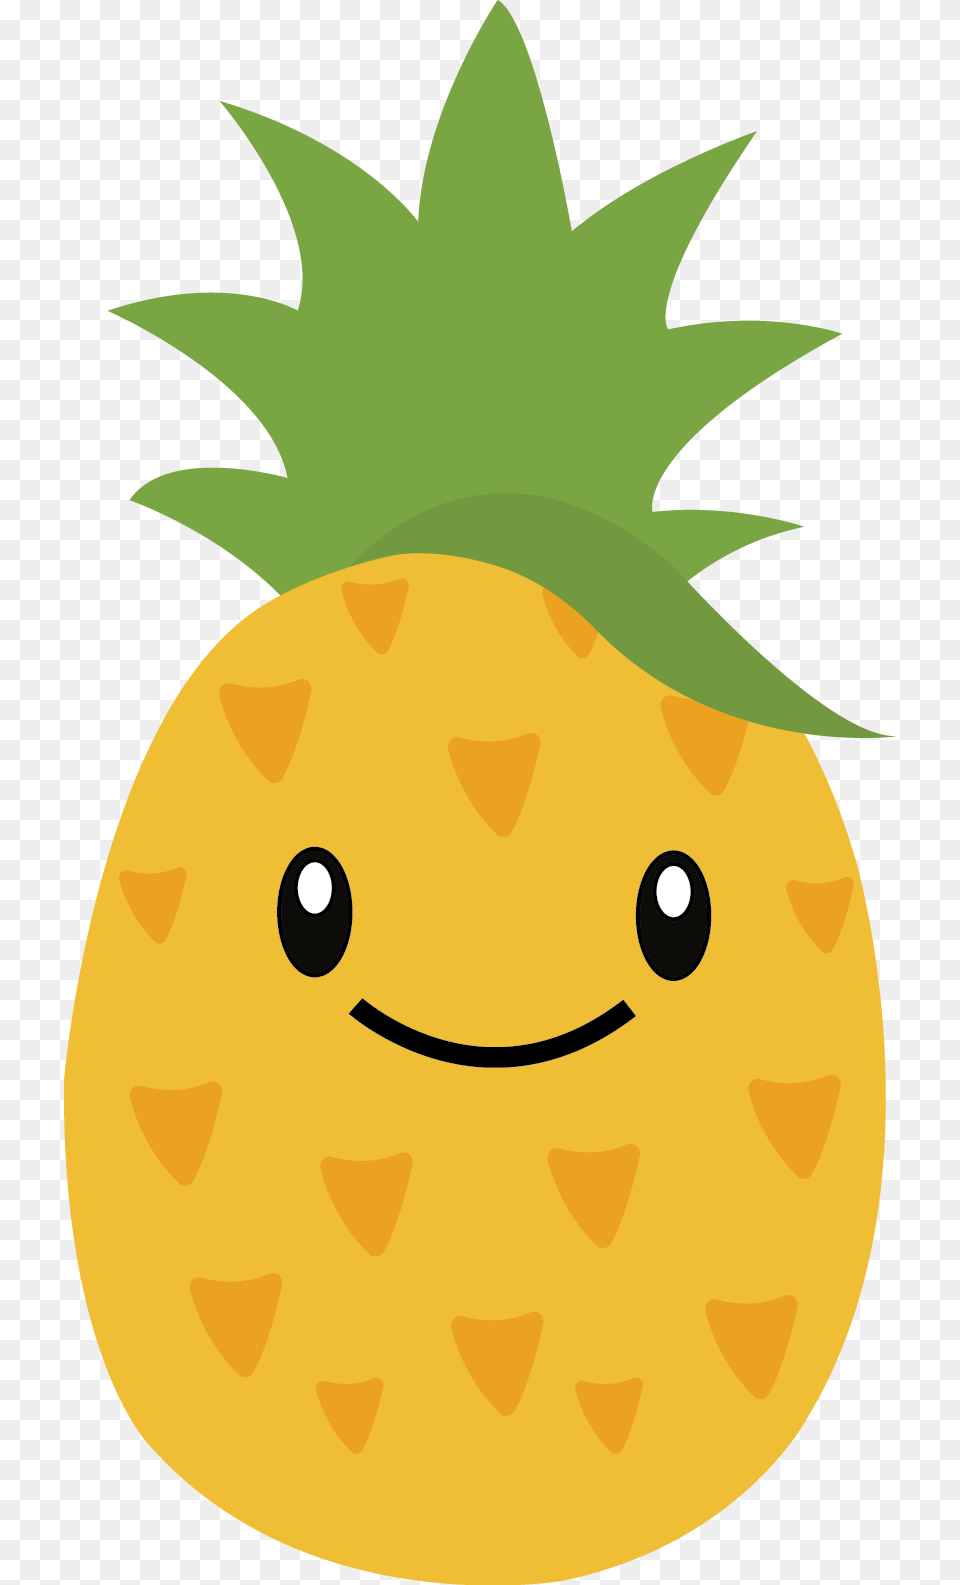 Pineapple Download Pineapple With Face, Food, Fruit, Plant, Produce Png